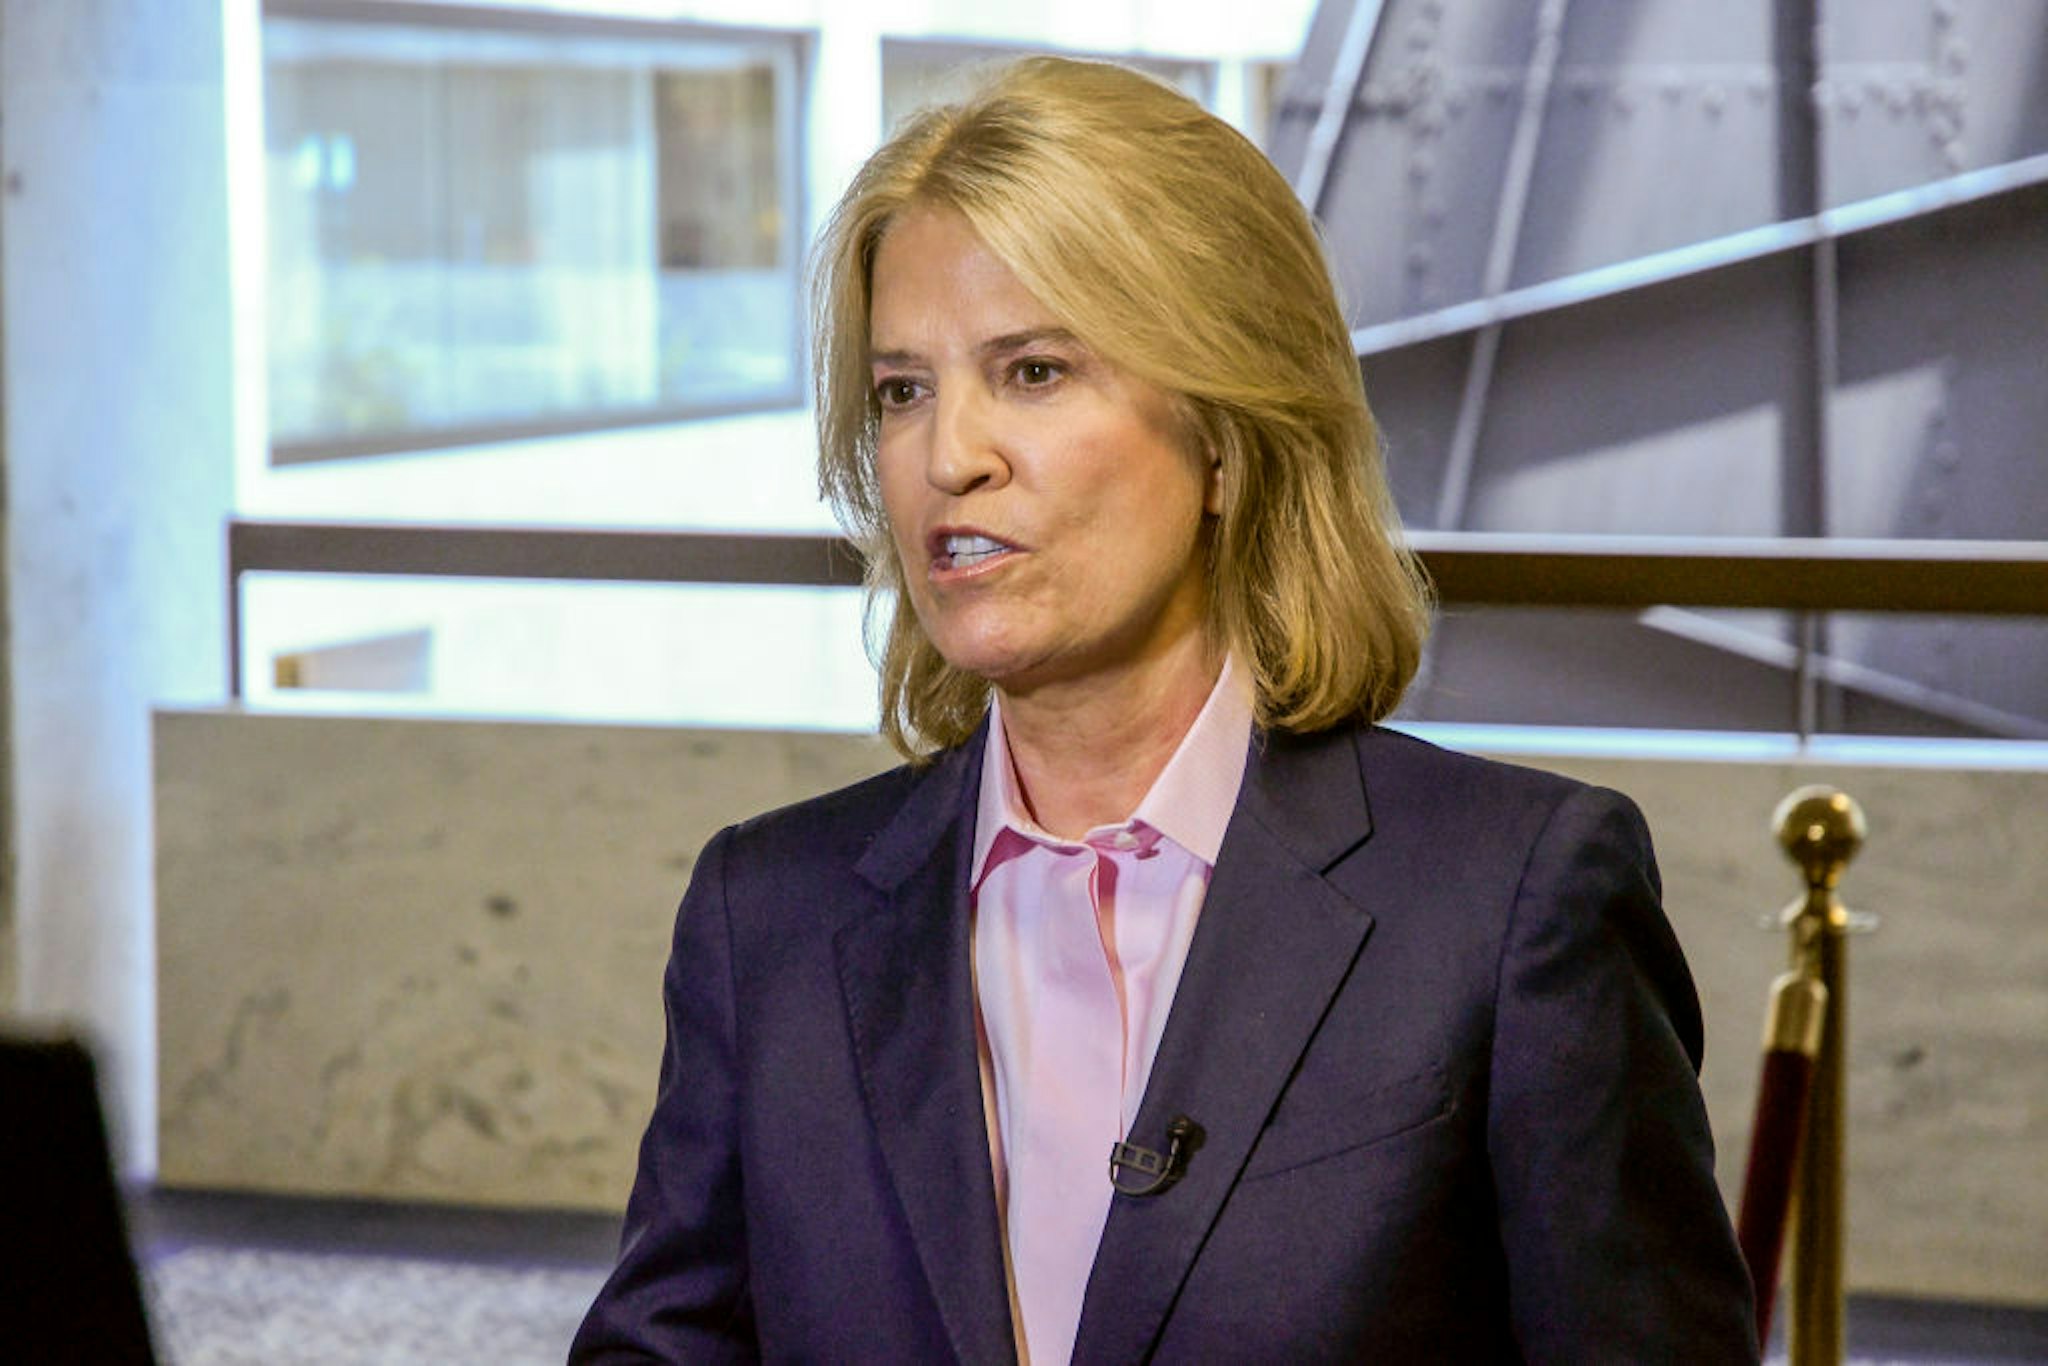 View of American broadcast journalist Greta Van Susteren as she reports outside room 216 of the Hart Senate Office Building, Washington DC, June 13, 2017. US Attorney General Jeff Sessions was scheduled to testify in the room before the Senate Intelligence Committee . (Photo by Mark Reinstein/Corbis Via Getty Images)